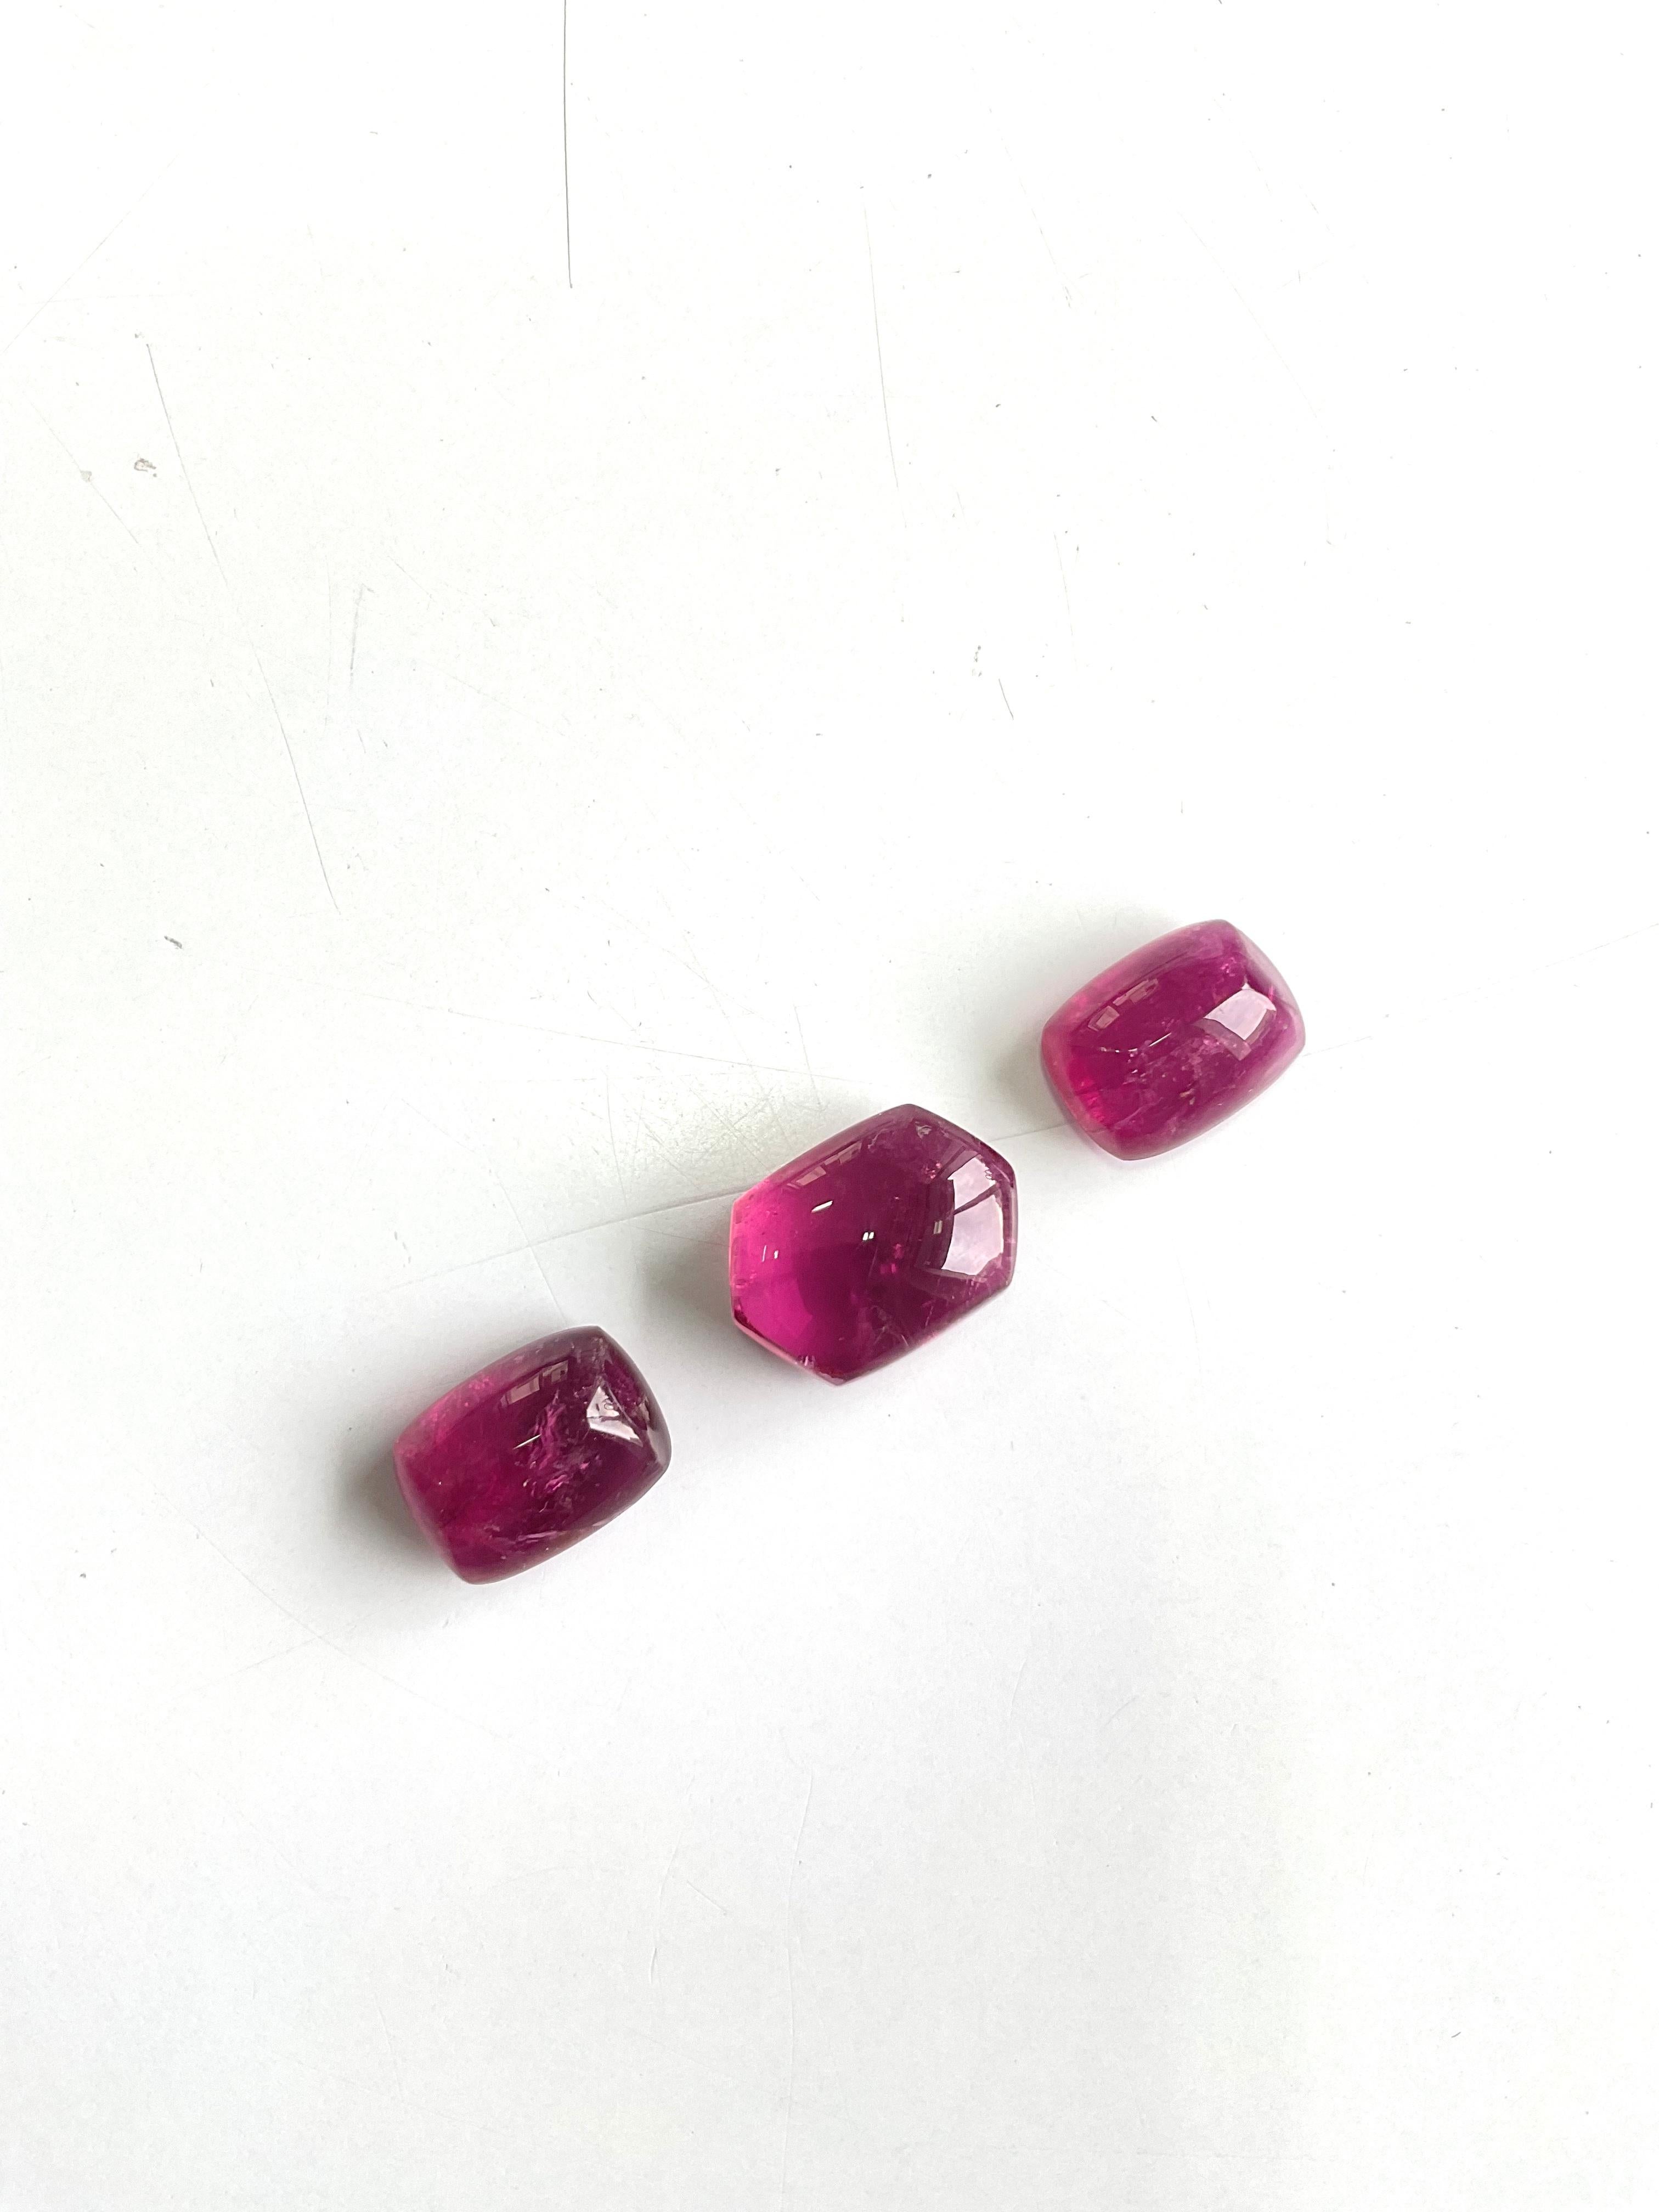 44.85 Carats Rubellite Tourmaline 3 Pieces Top Fine Jewelry Set Natural Gemstone For Sale 1